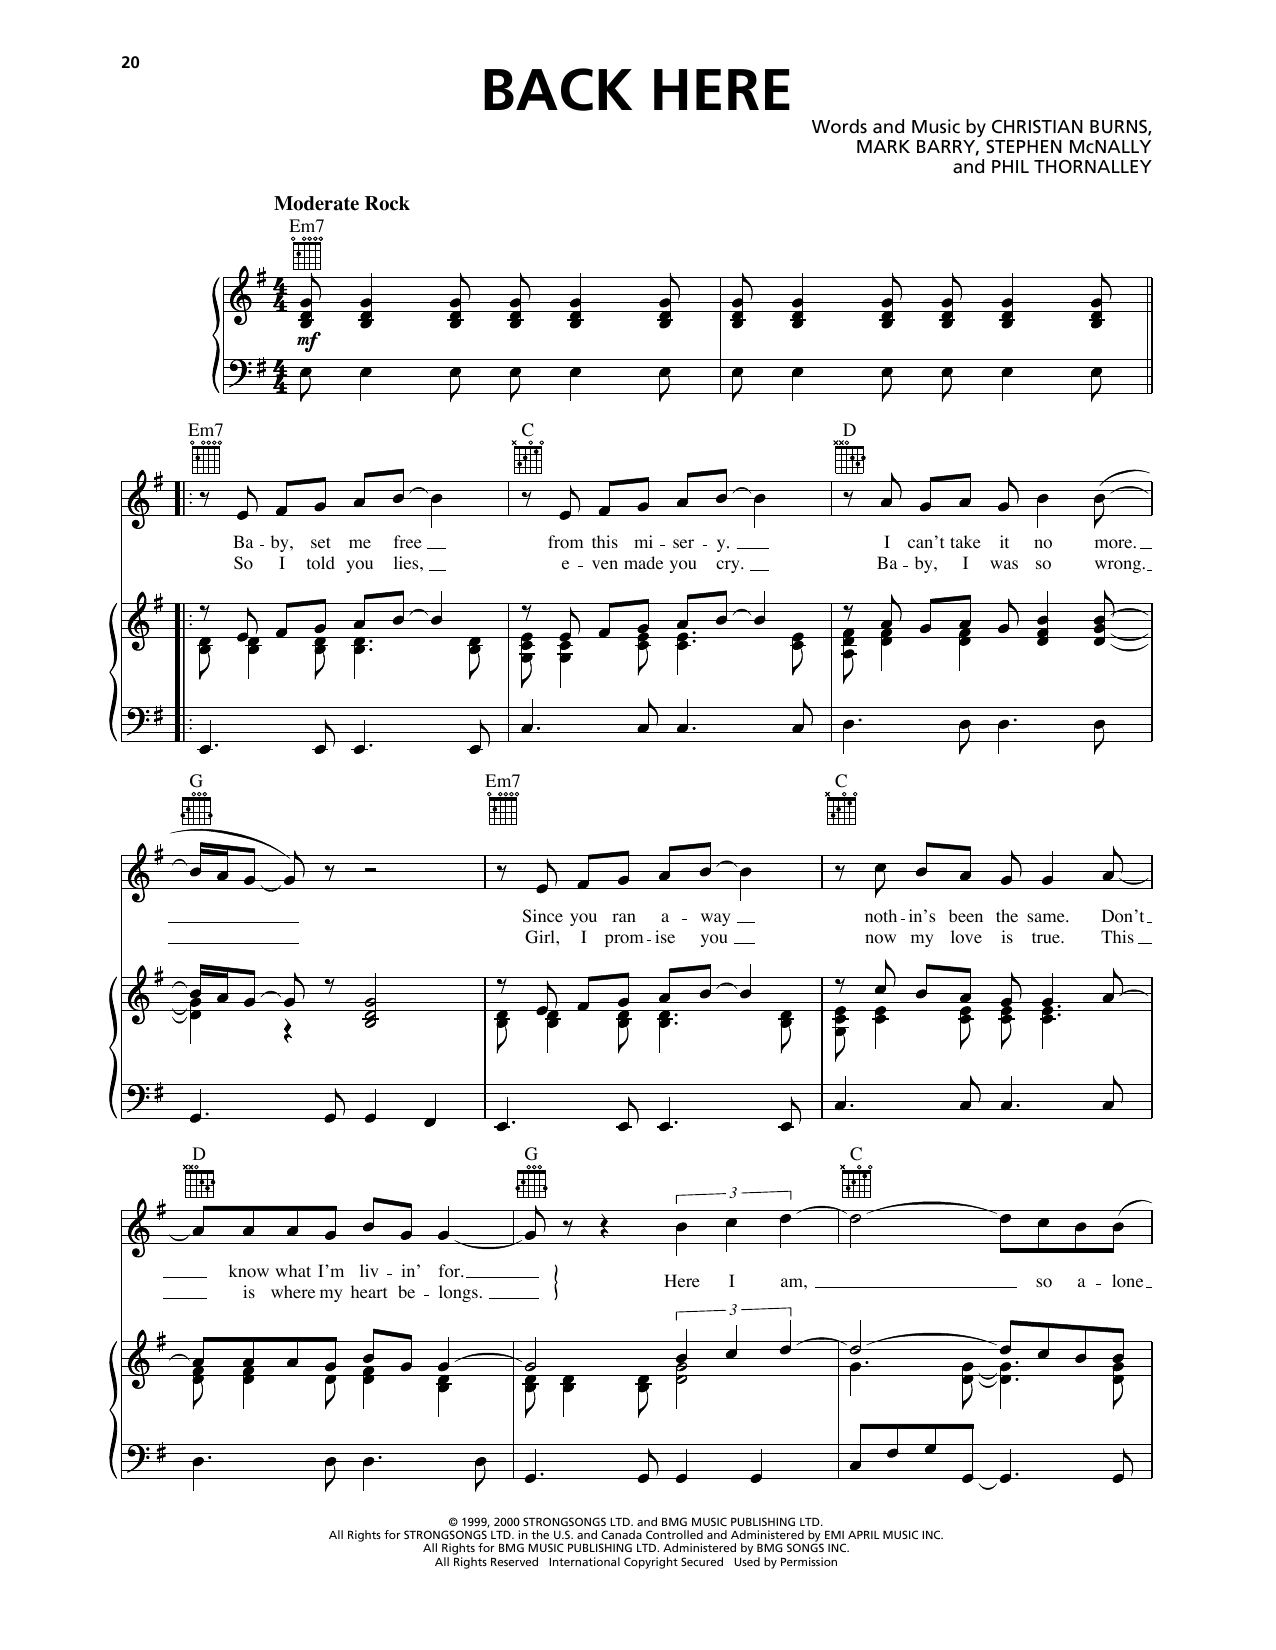 BBMak Back Here sheet music notes and chords. Download Printable PDF.